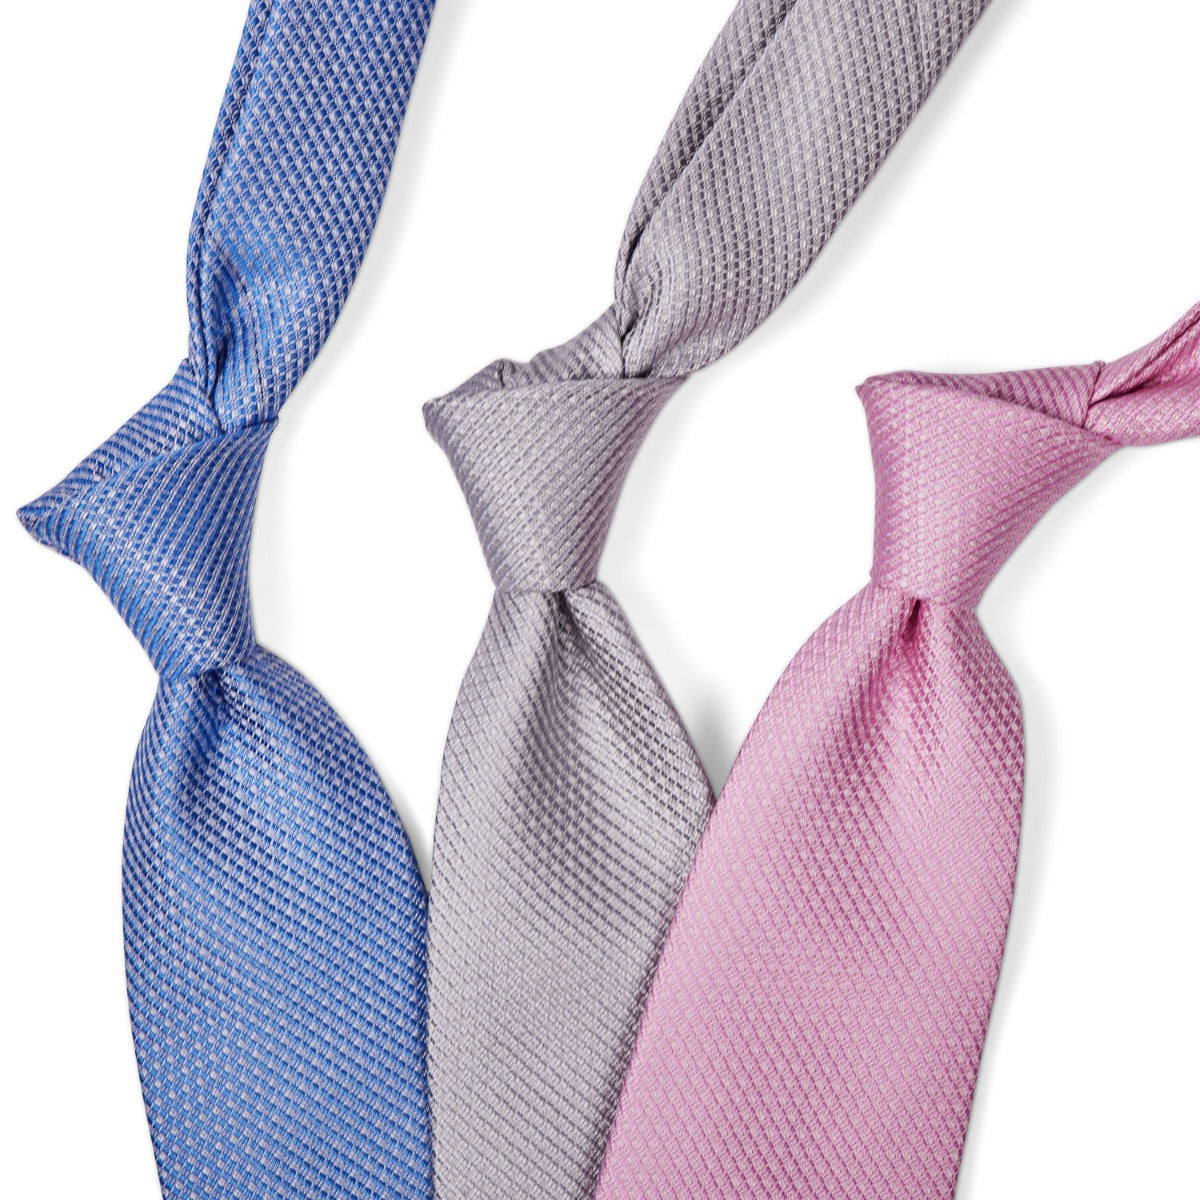 Three different colored Sovereign Grade Silver Jacquard Mock Grenadine ties on a white background from KirbyAllison.com.